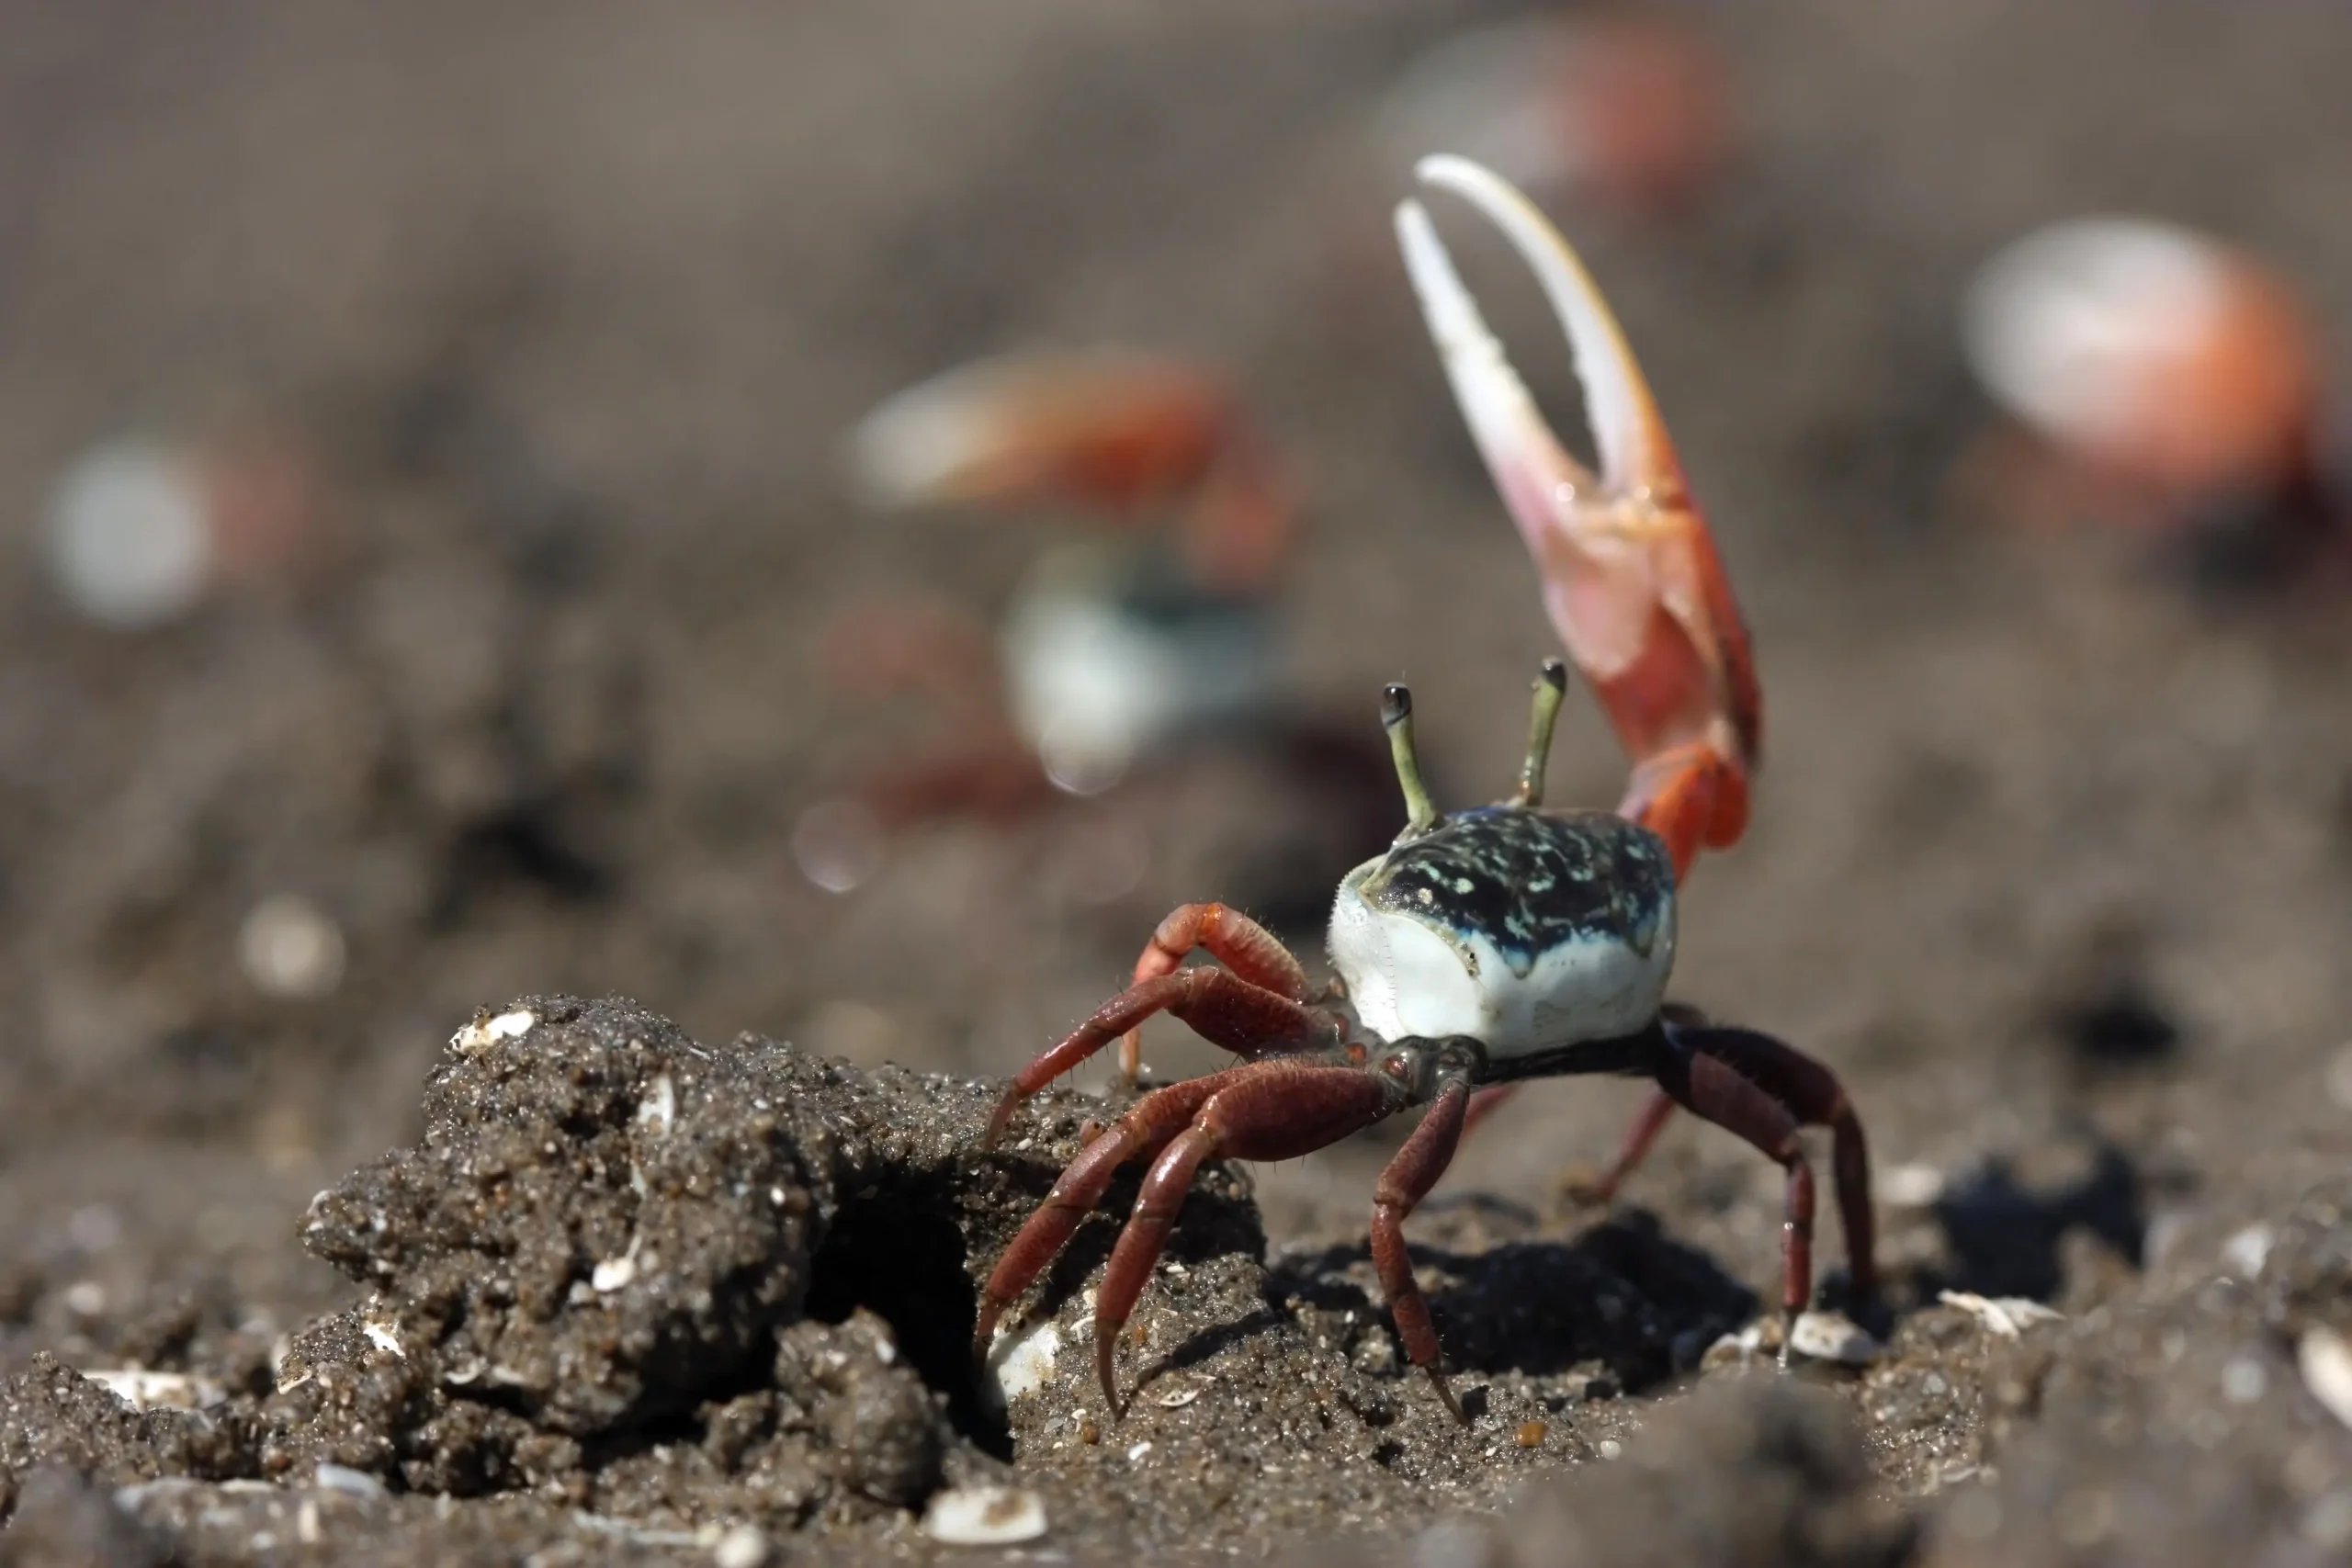 violin crab - What is special about a fiddler crab